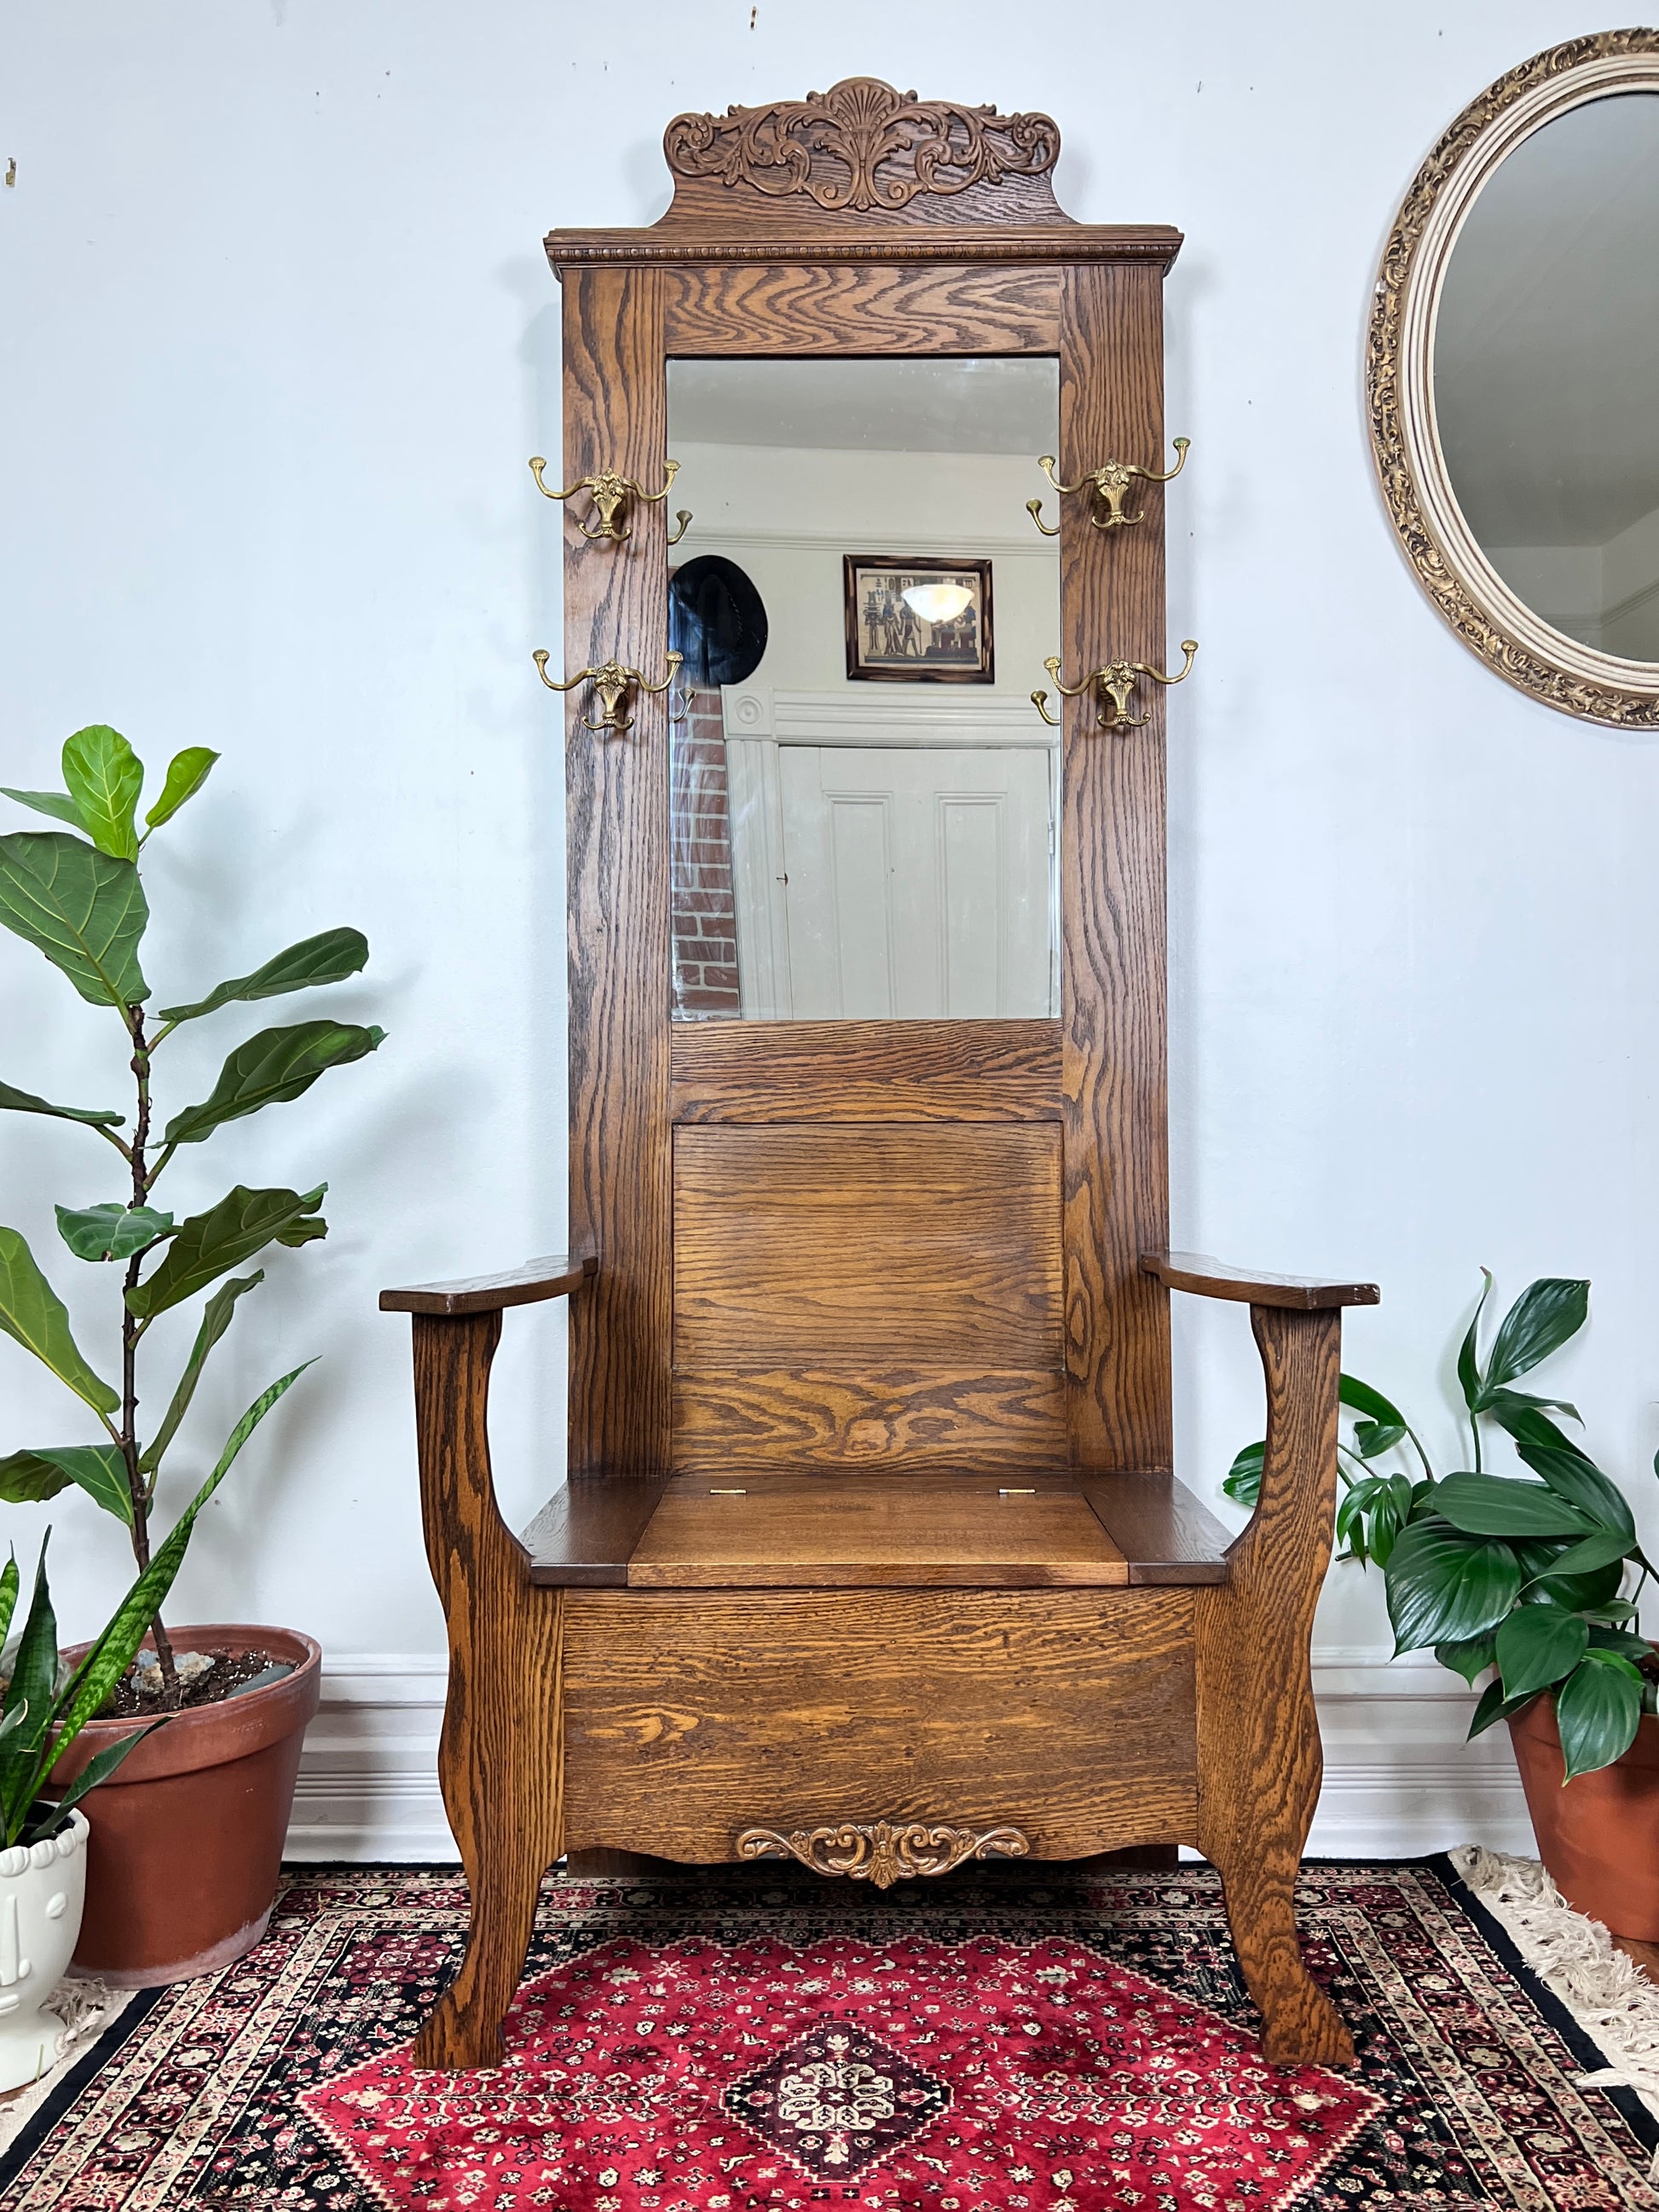 This is an antique oak hall tree bench with mirror, coat hooks & under the seat storage.